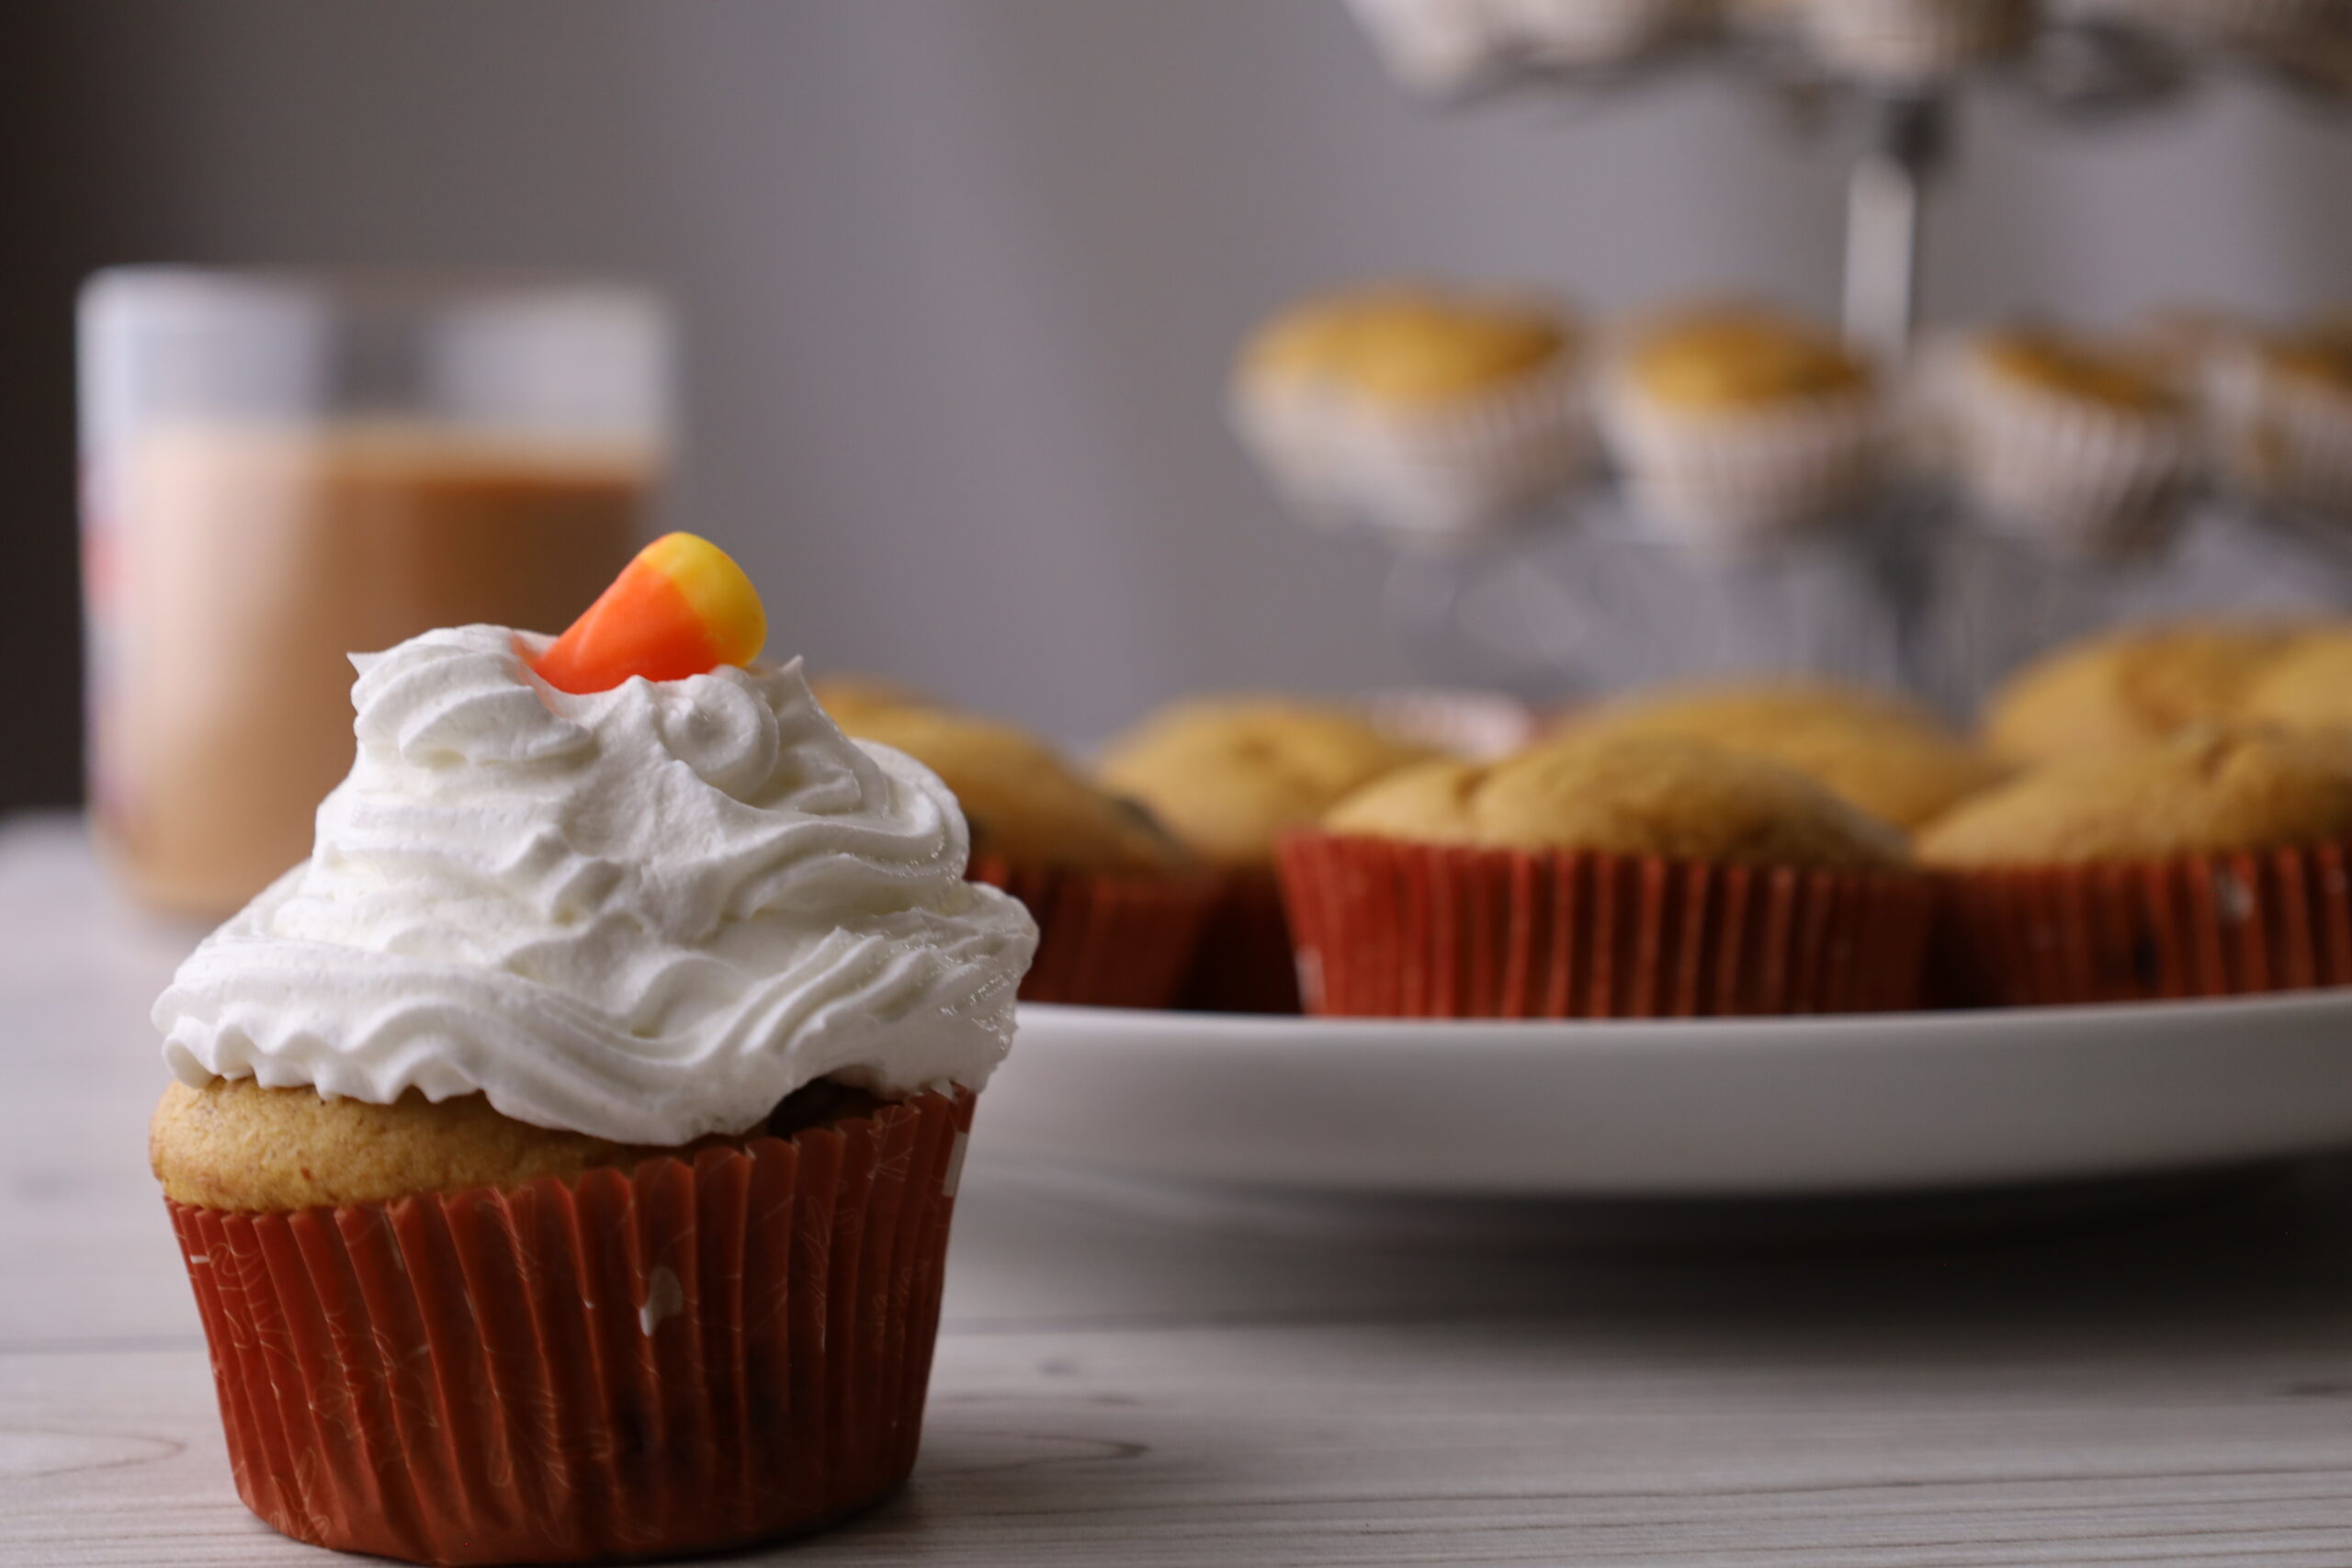 how-to-eat-a-cupcake-without-getting-messy